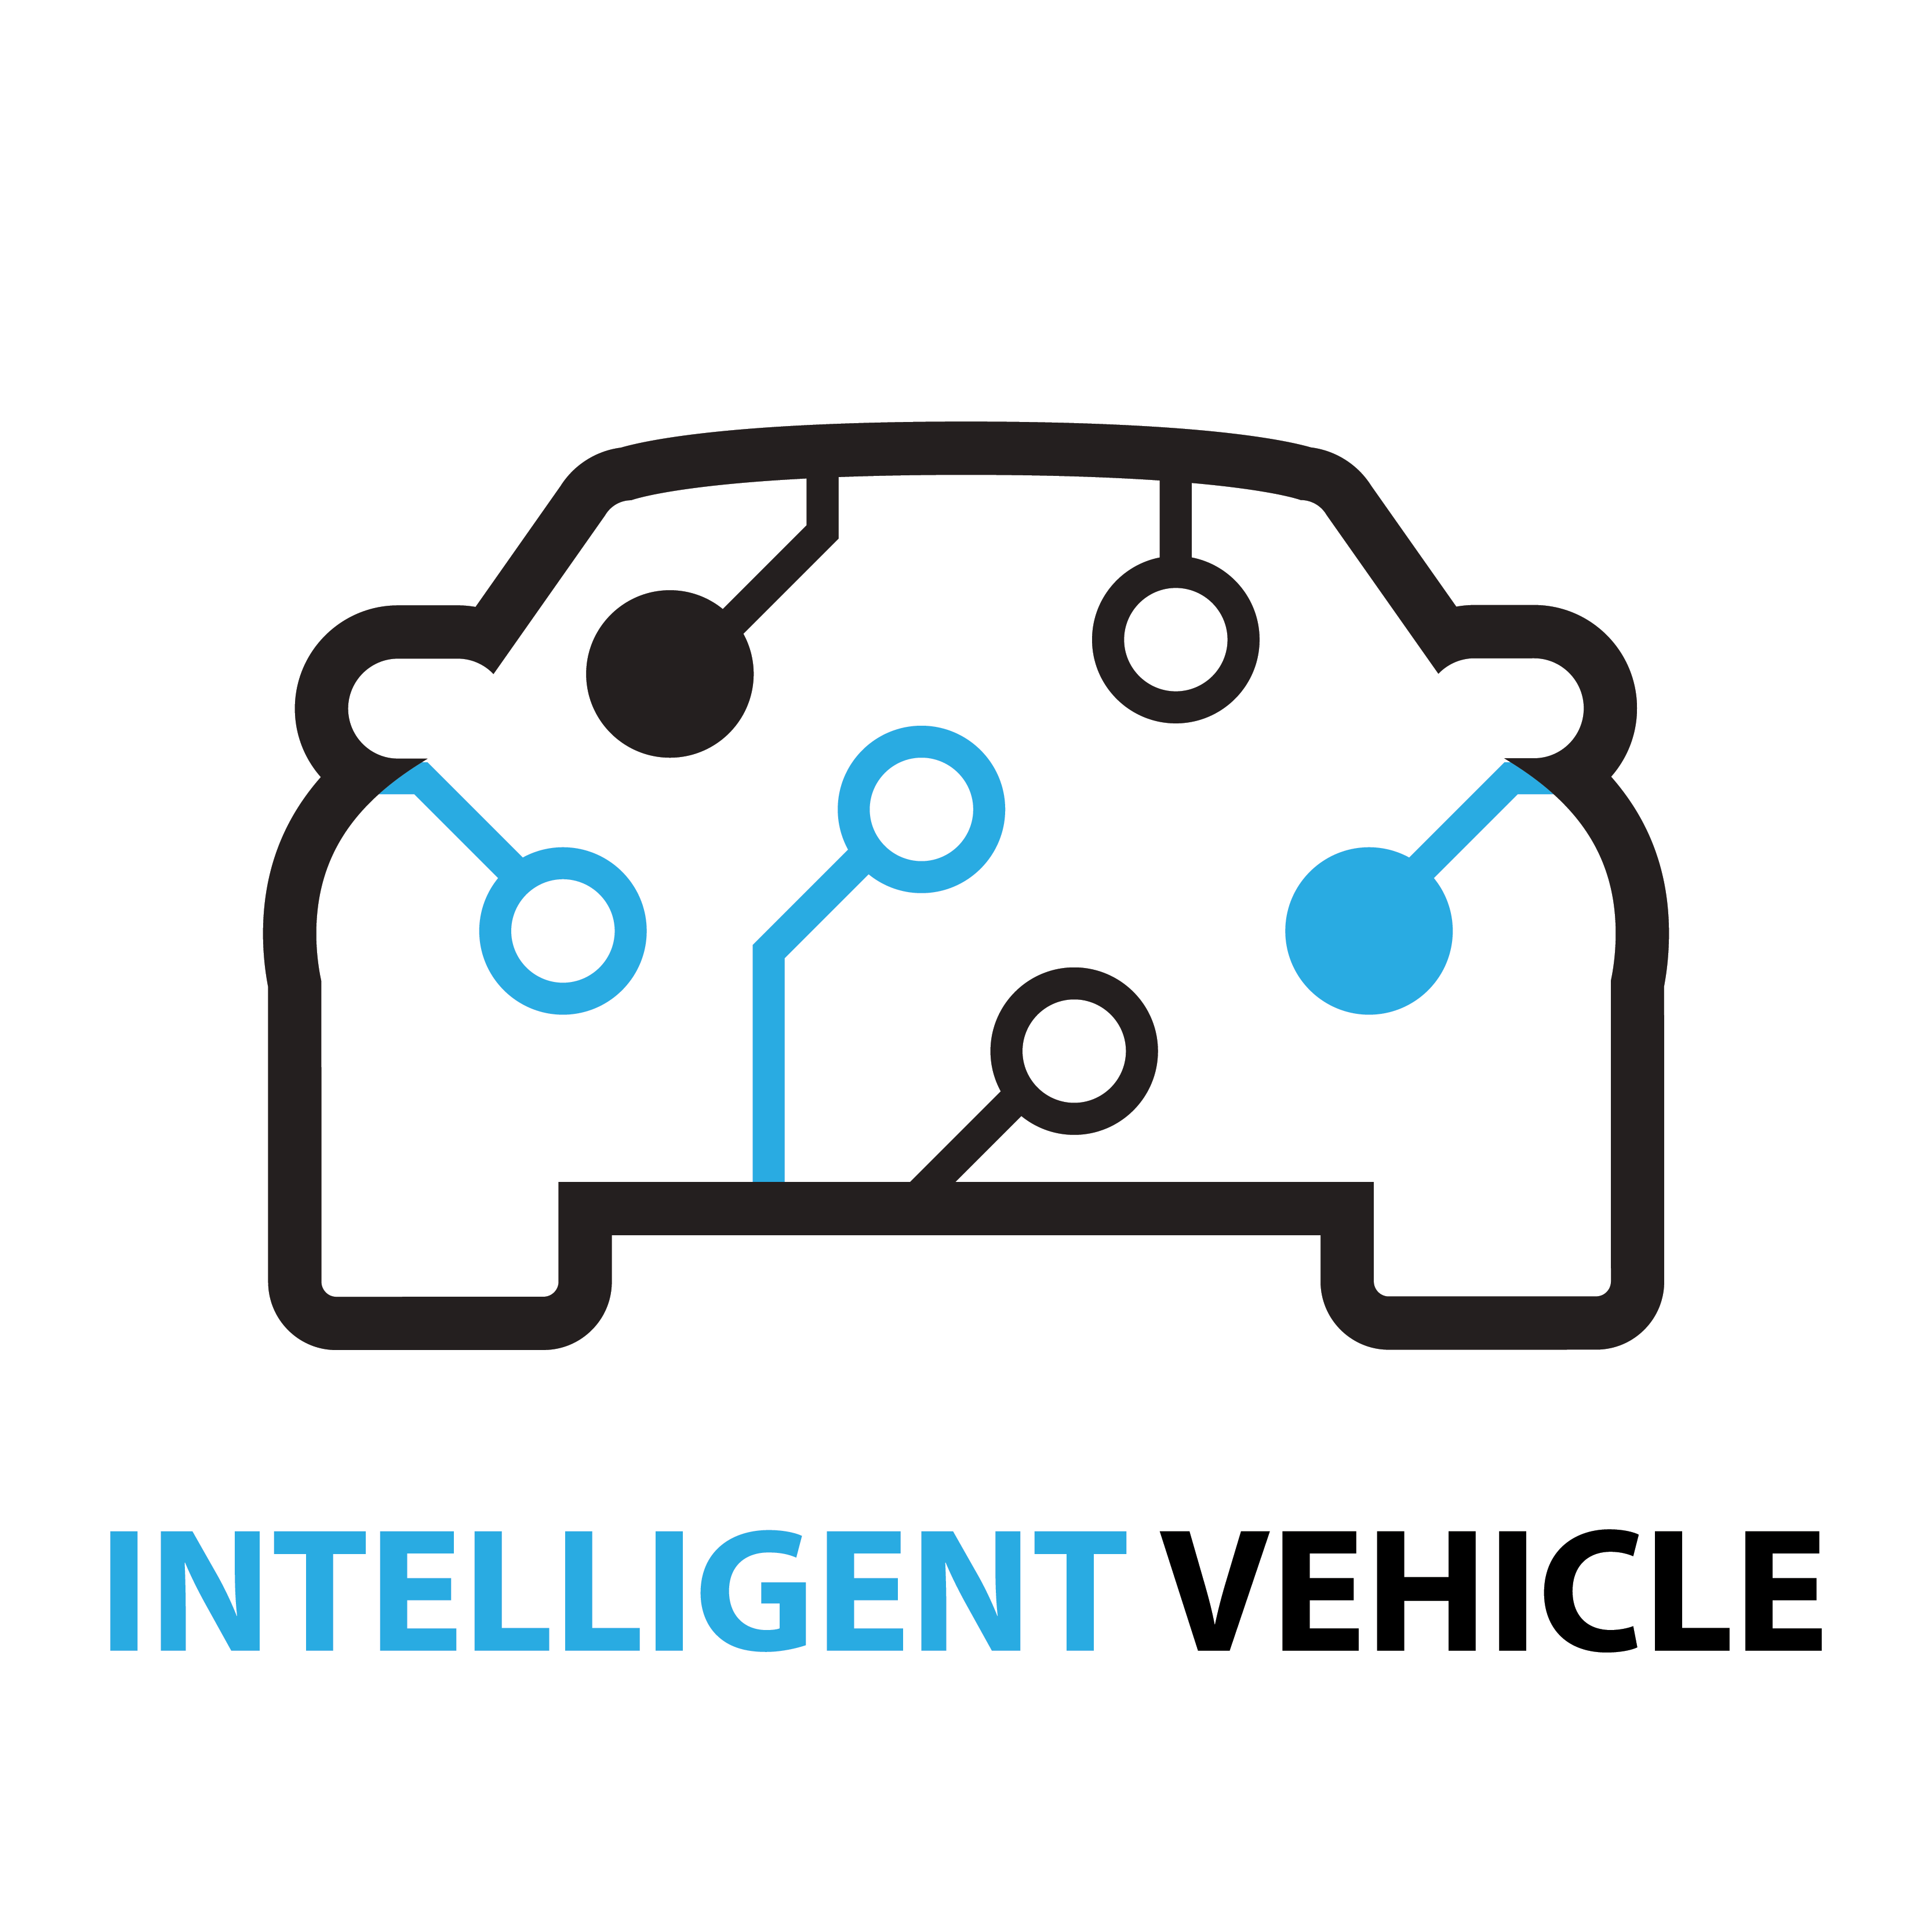 Intelligent Vehicle Perception Based on Inertial Sensing and Artificial Intelligence